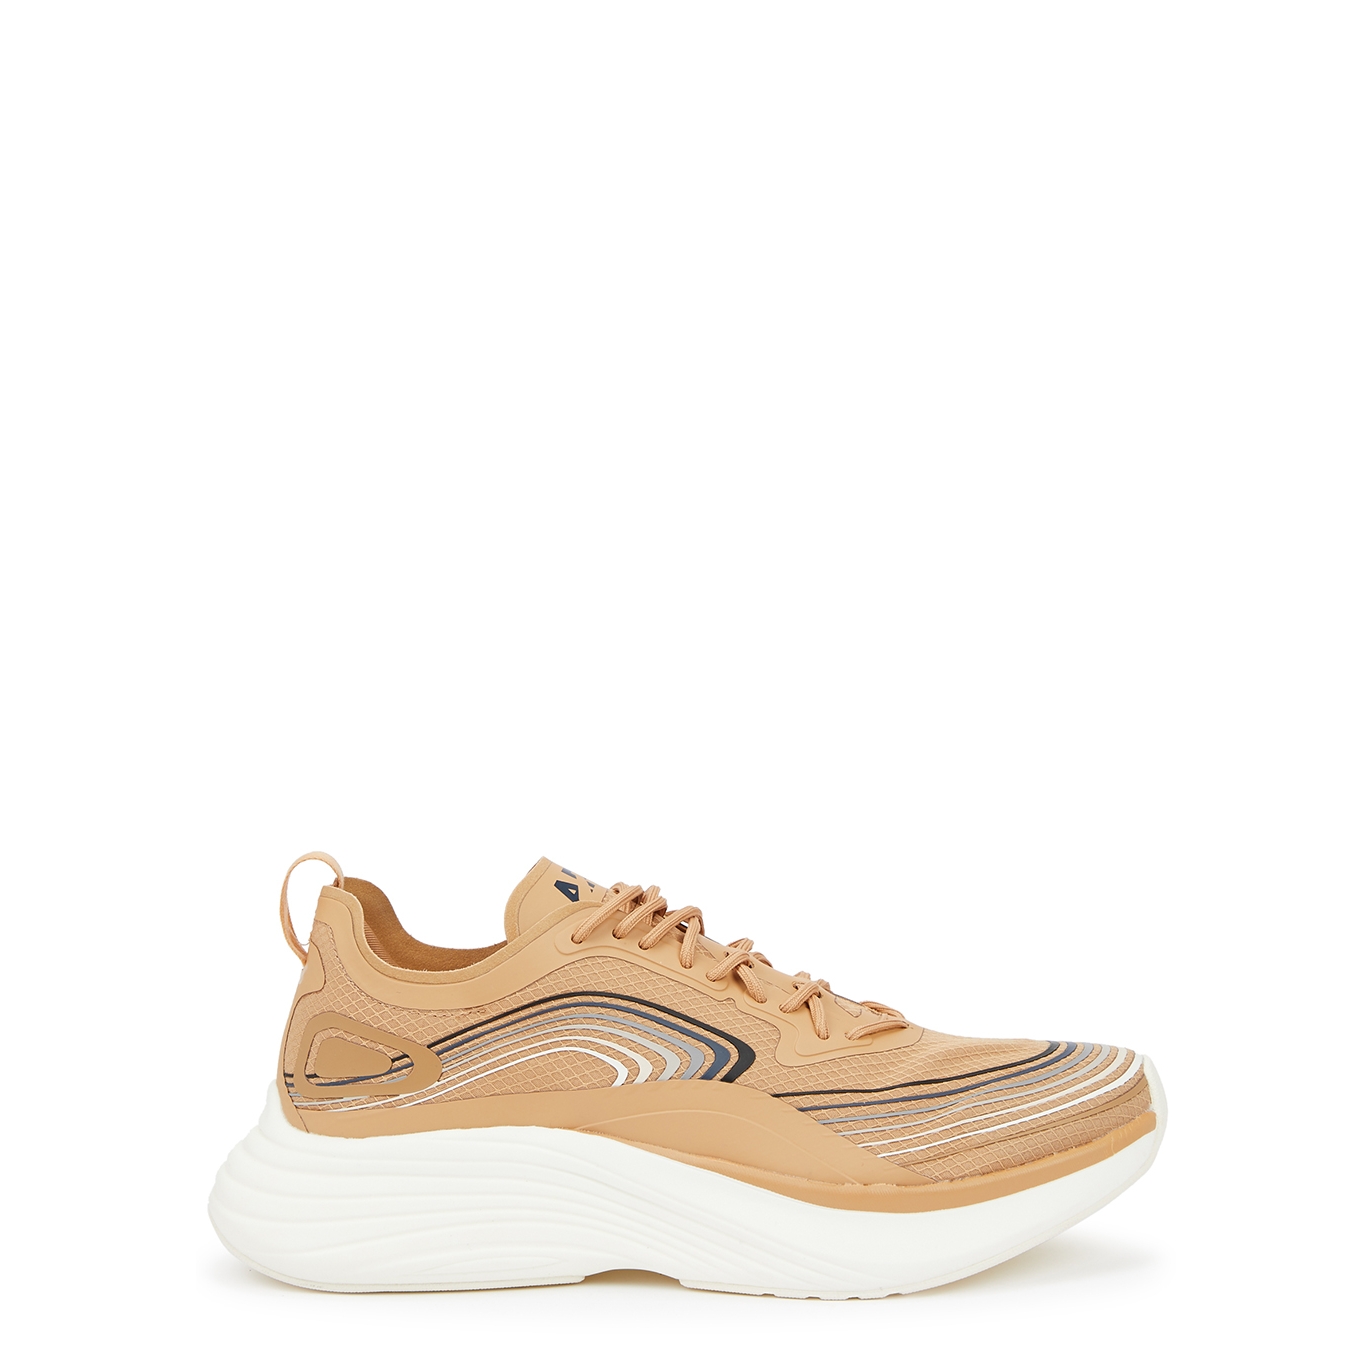 Athletic Propulsion Labs Streamline Striped Aerolux Sneakers - TAN - 6